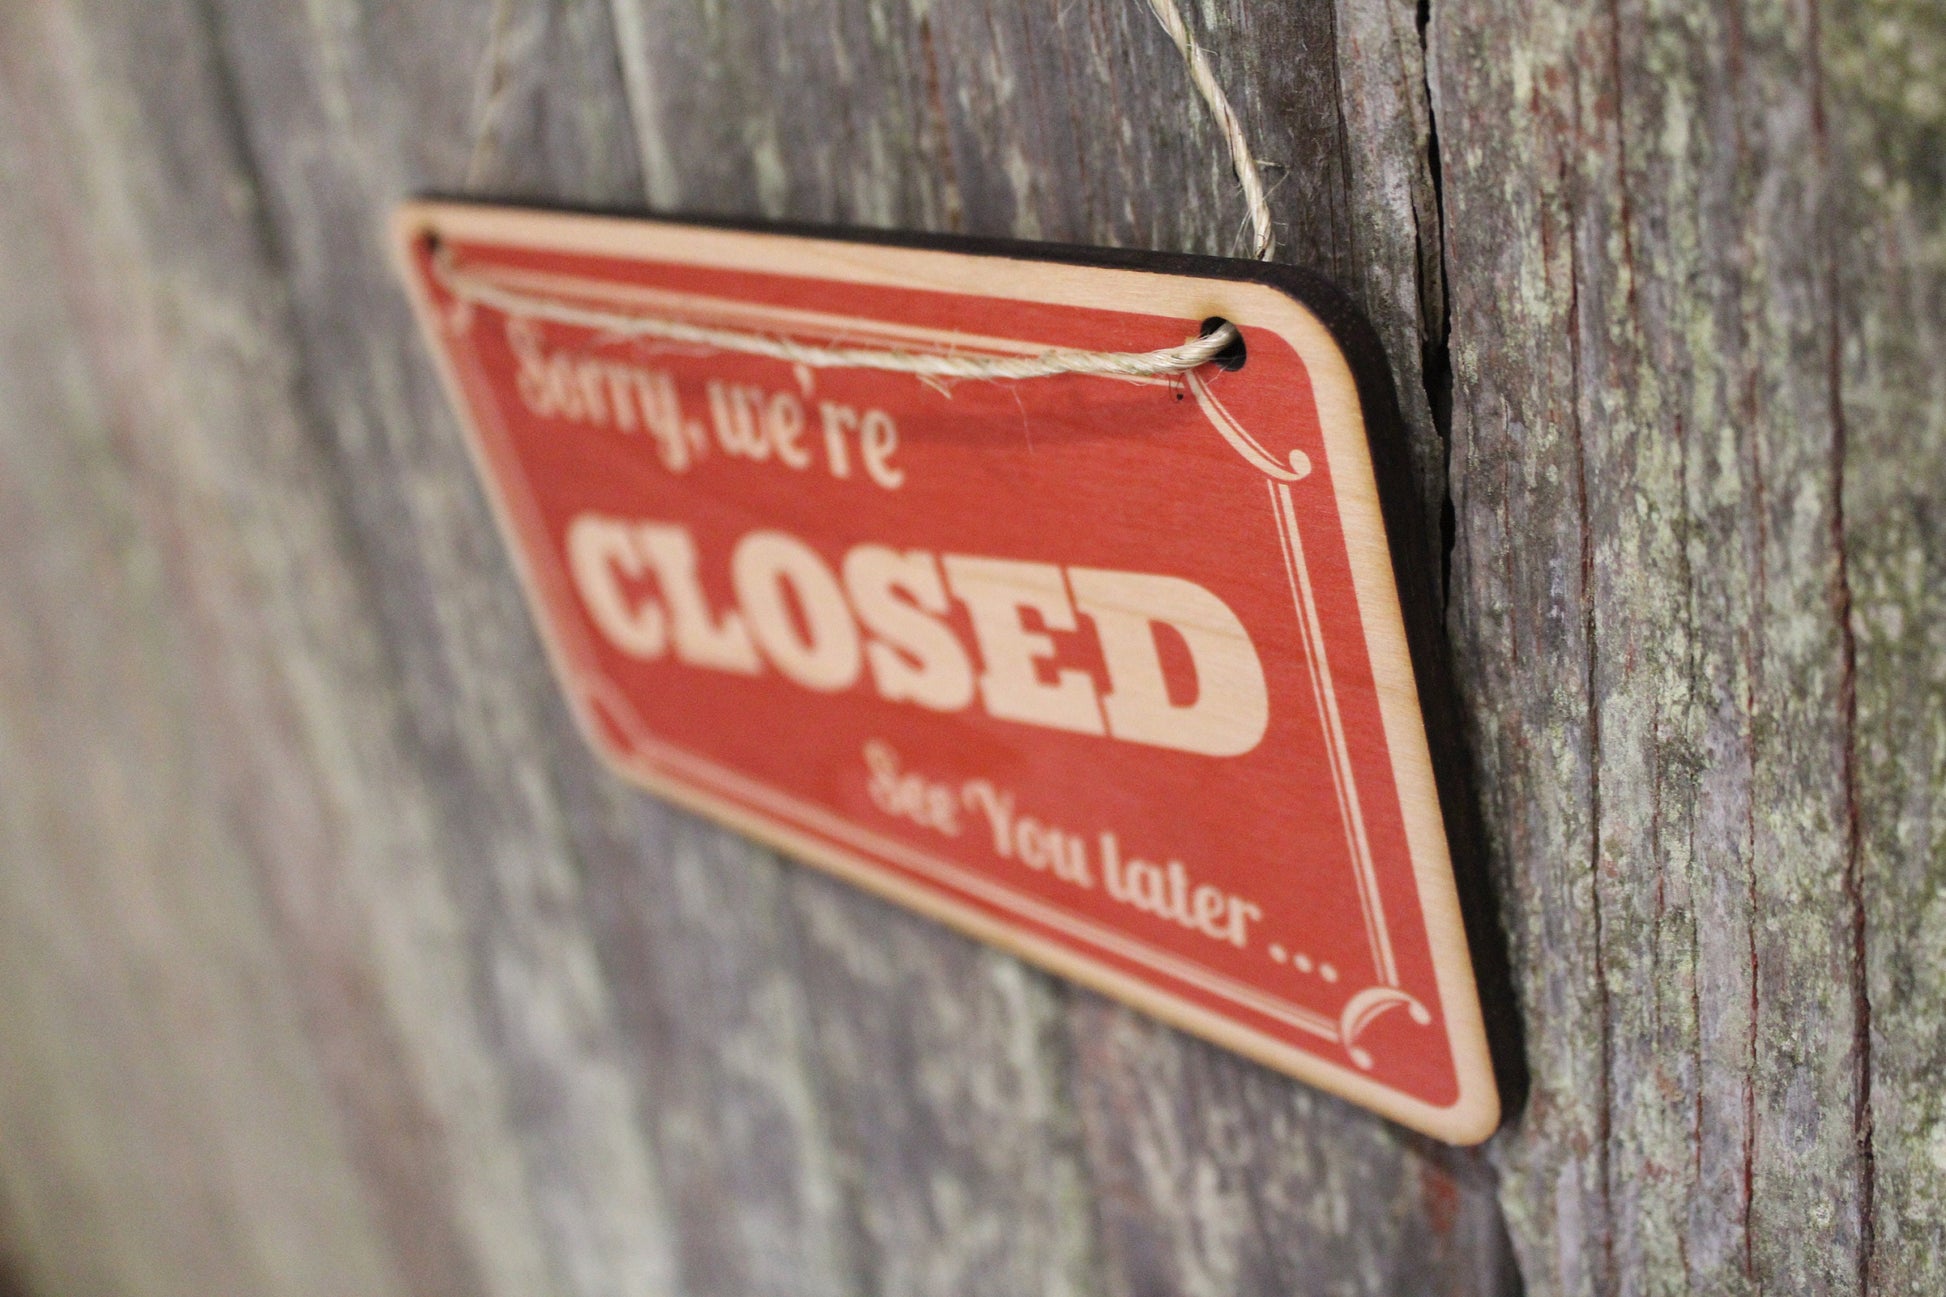 Open Closed Sign Red Come In Sorry We're Closed Double Sided Close Advertising Small Business Wooden Front Door Entry Way Decor Plaque Wood